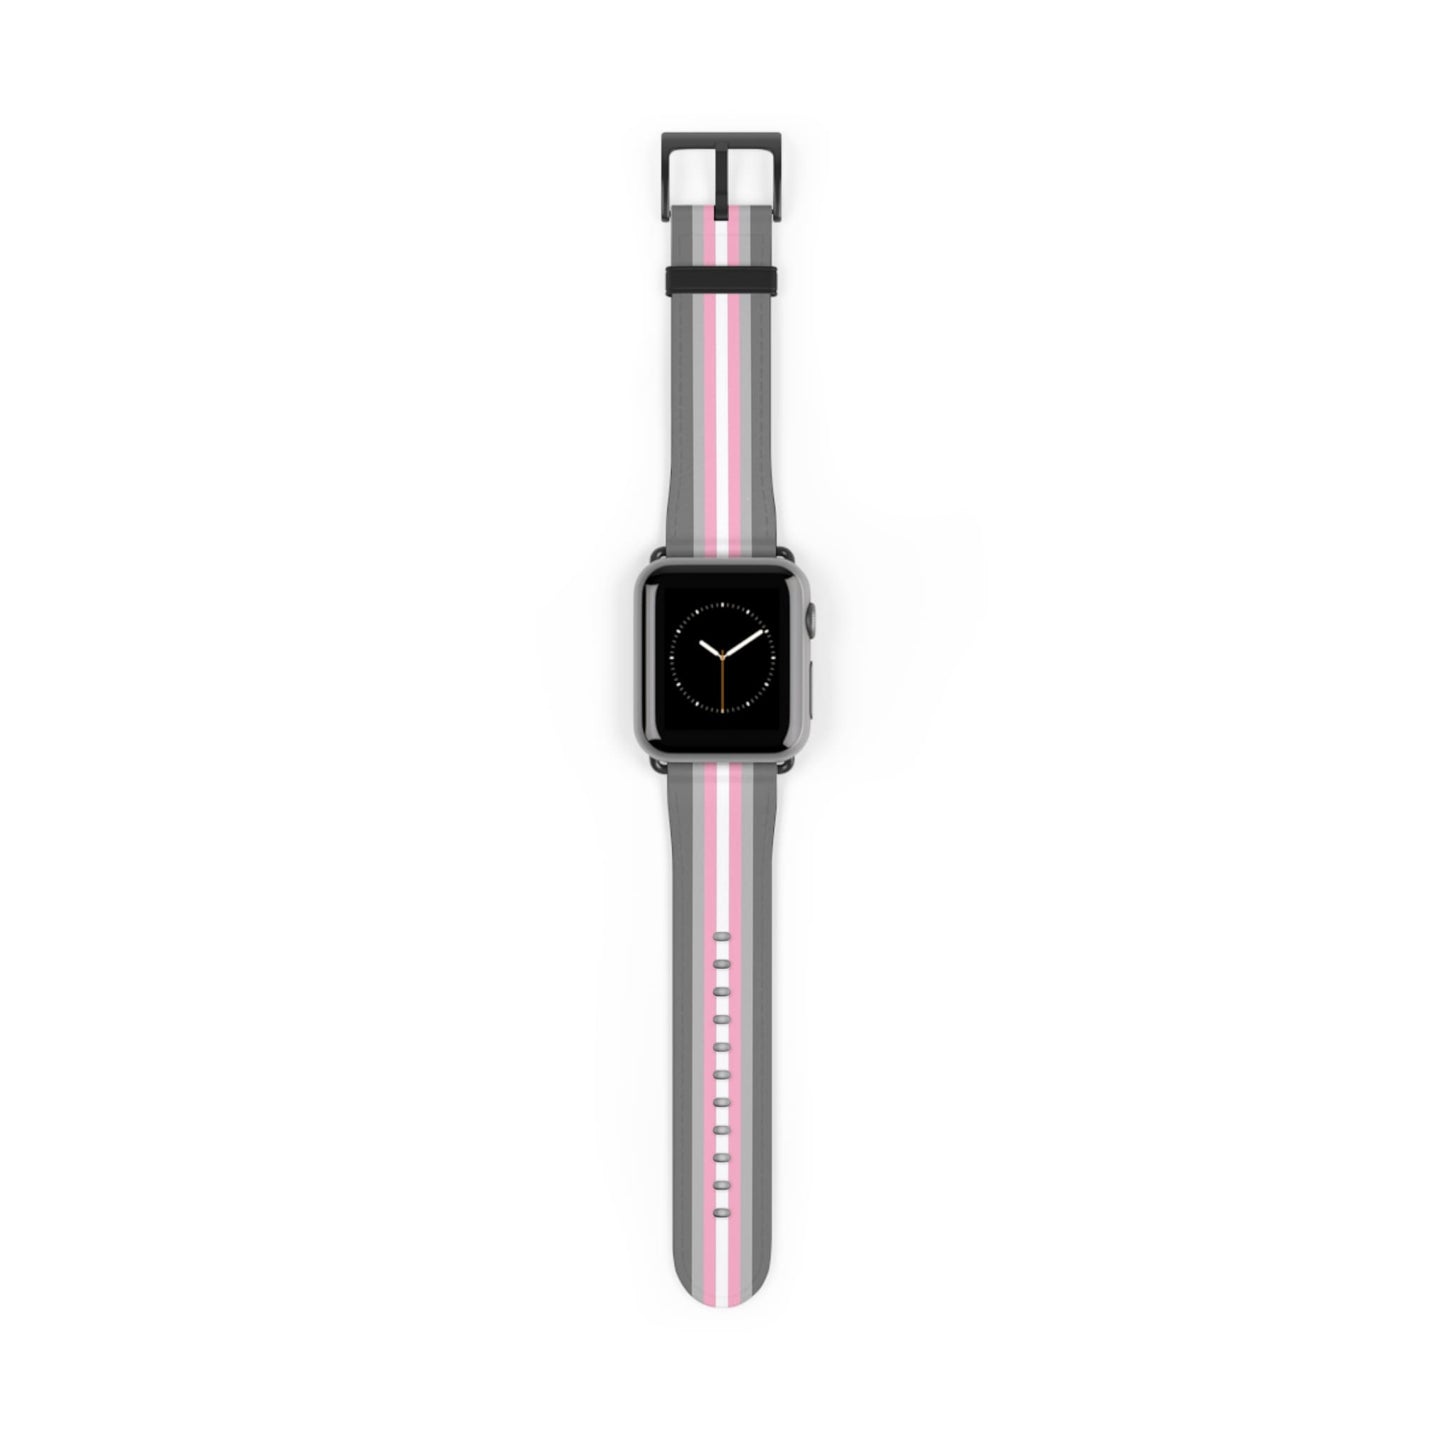 demigirl watch band for Apple iwatch, black